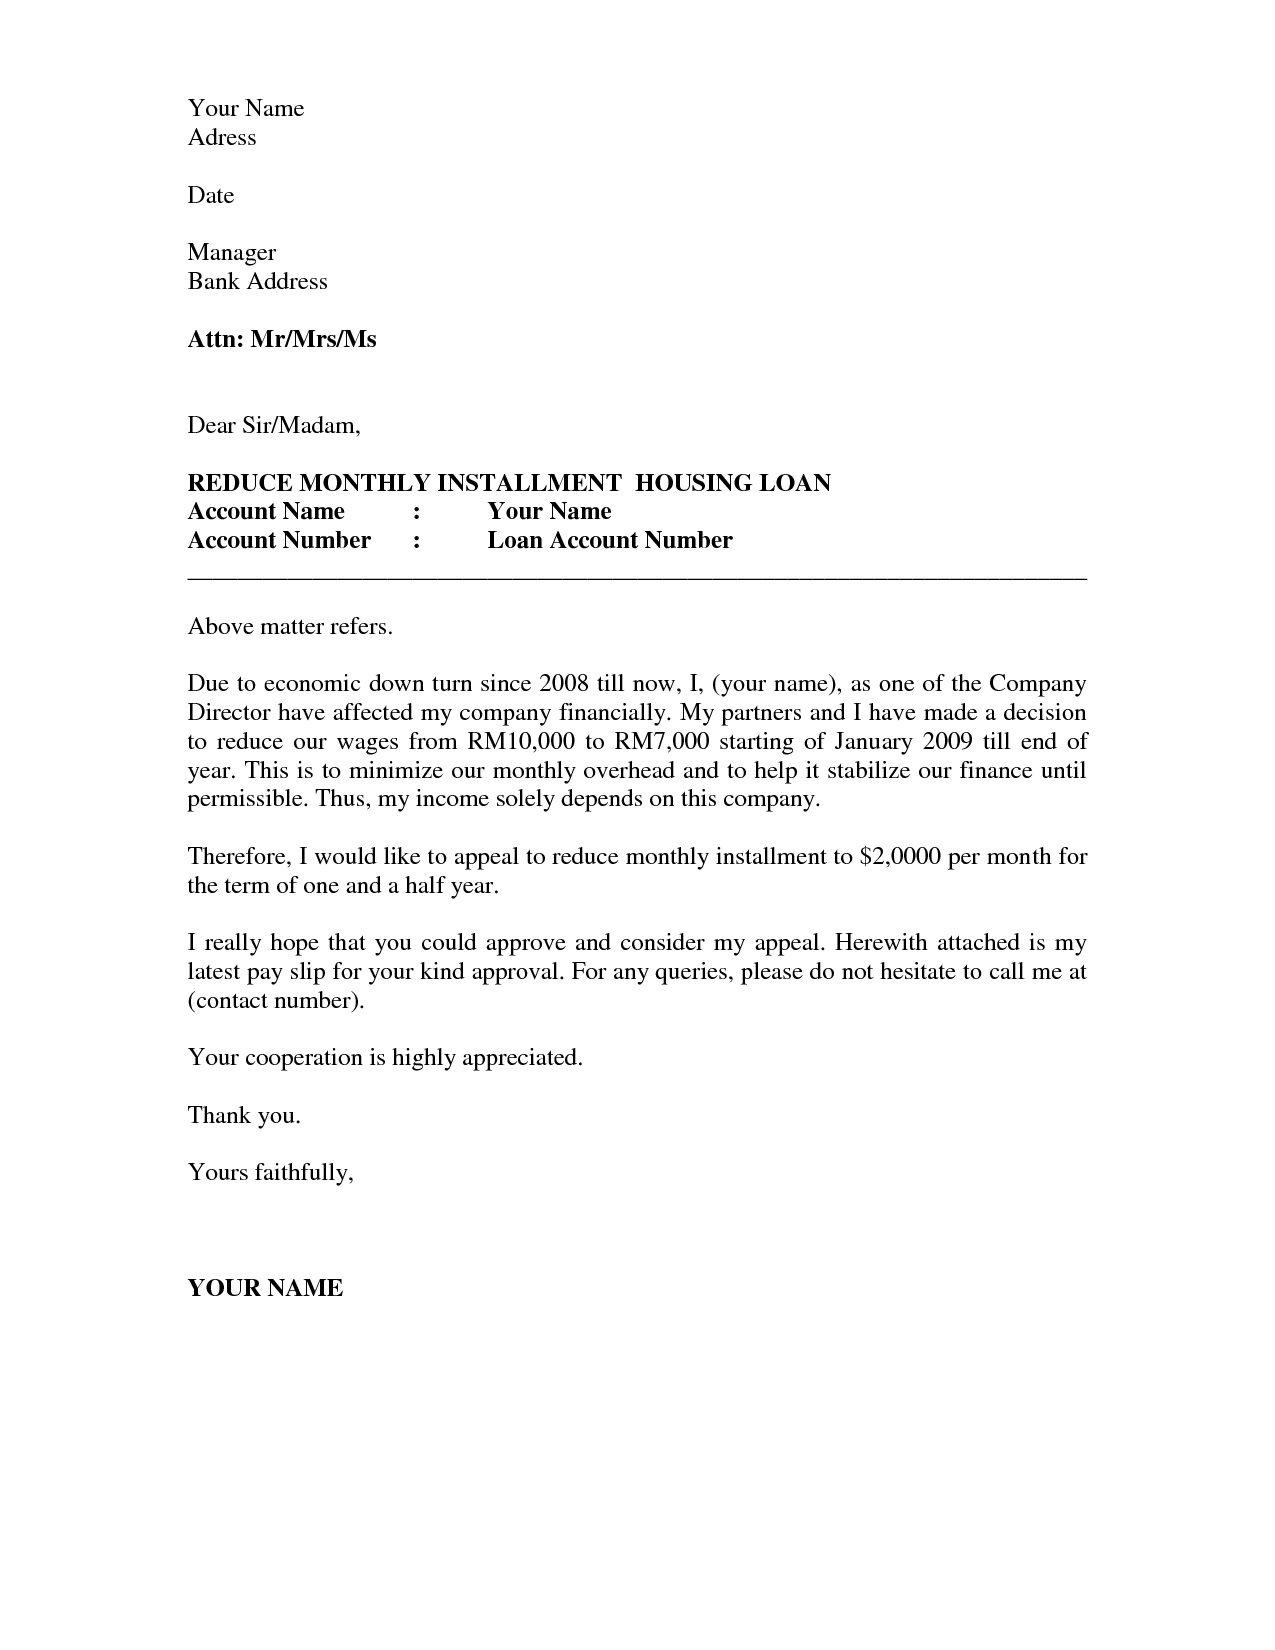 Fundraising Appeal Letter Template - How to Write A Good Appeal Letter Acurnamedia